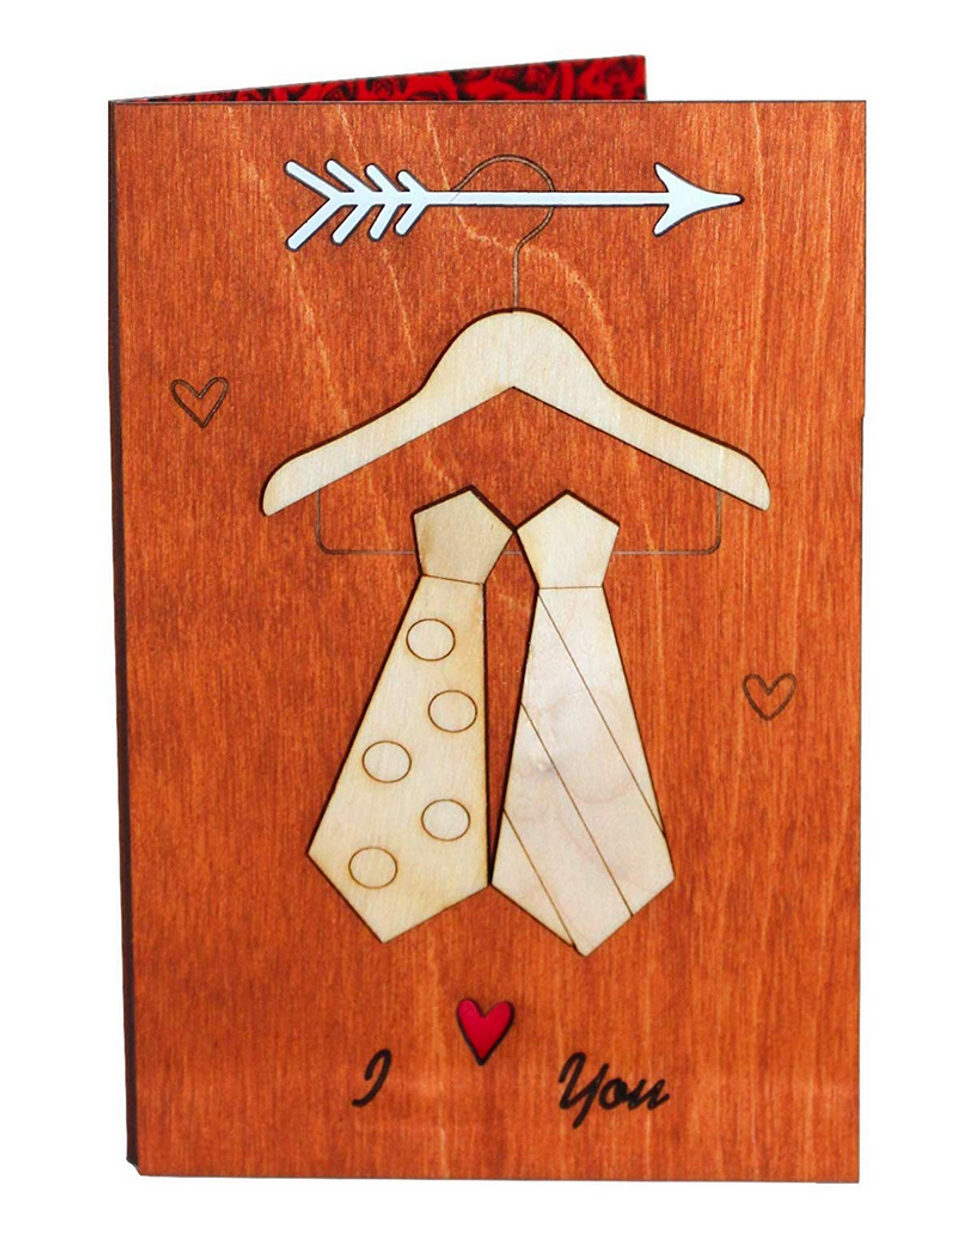 Buy the Real Wood Love Greeting Card I Heart You Ties on Amazon